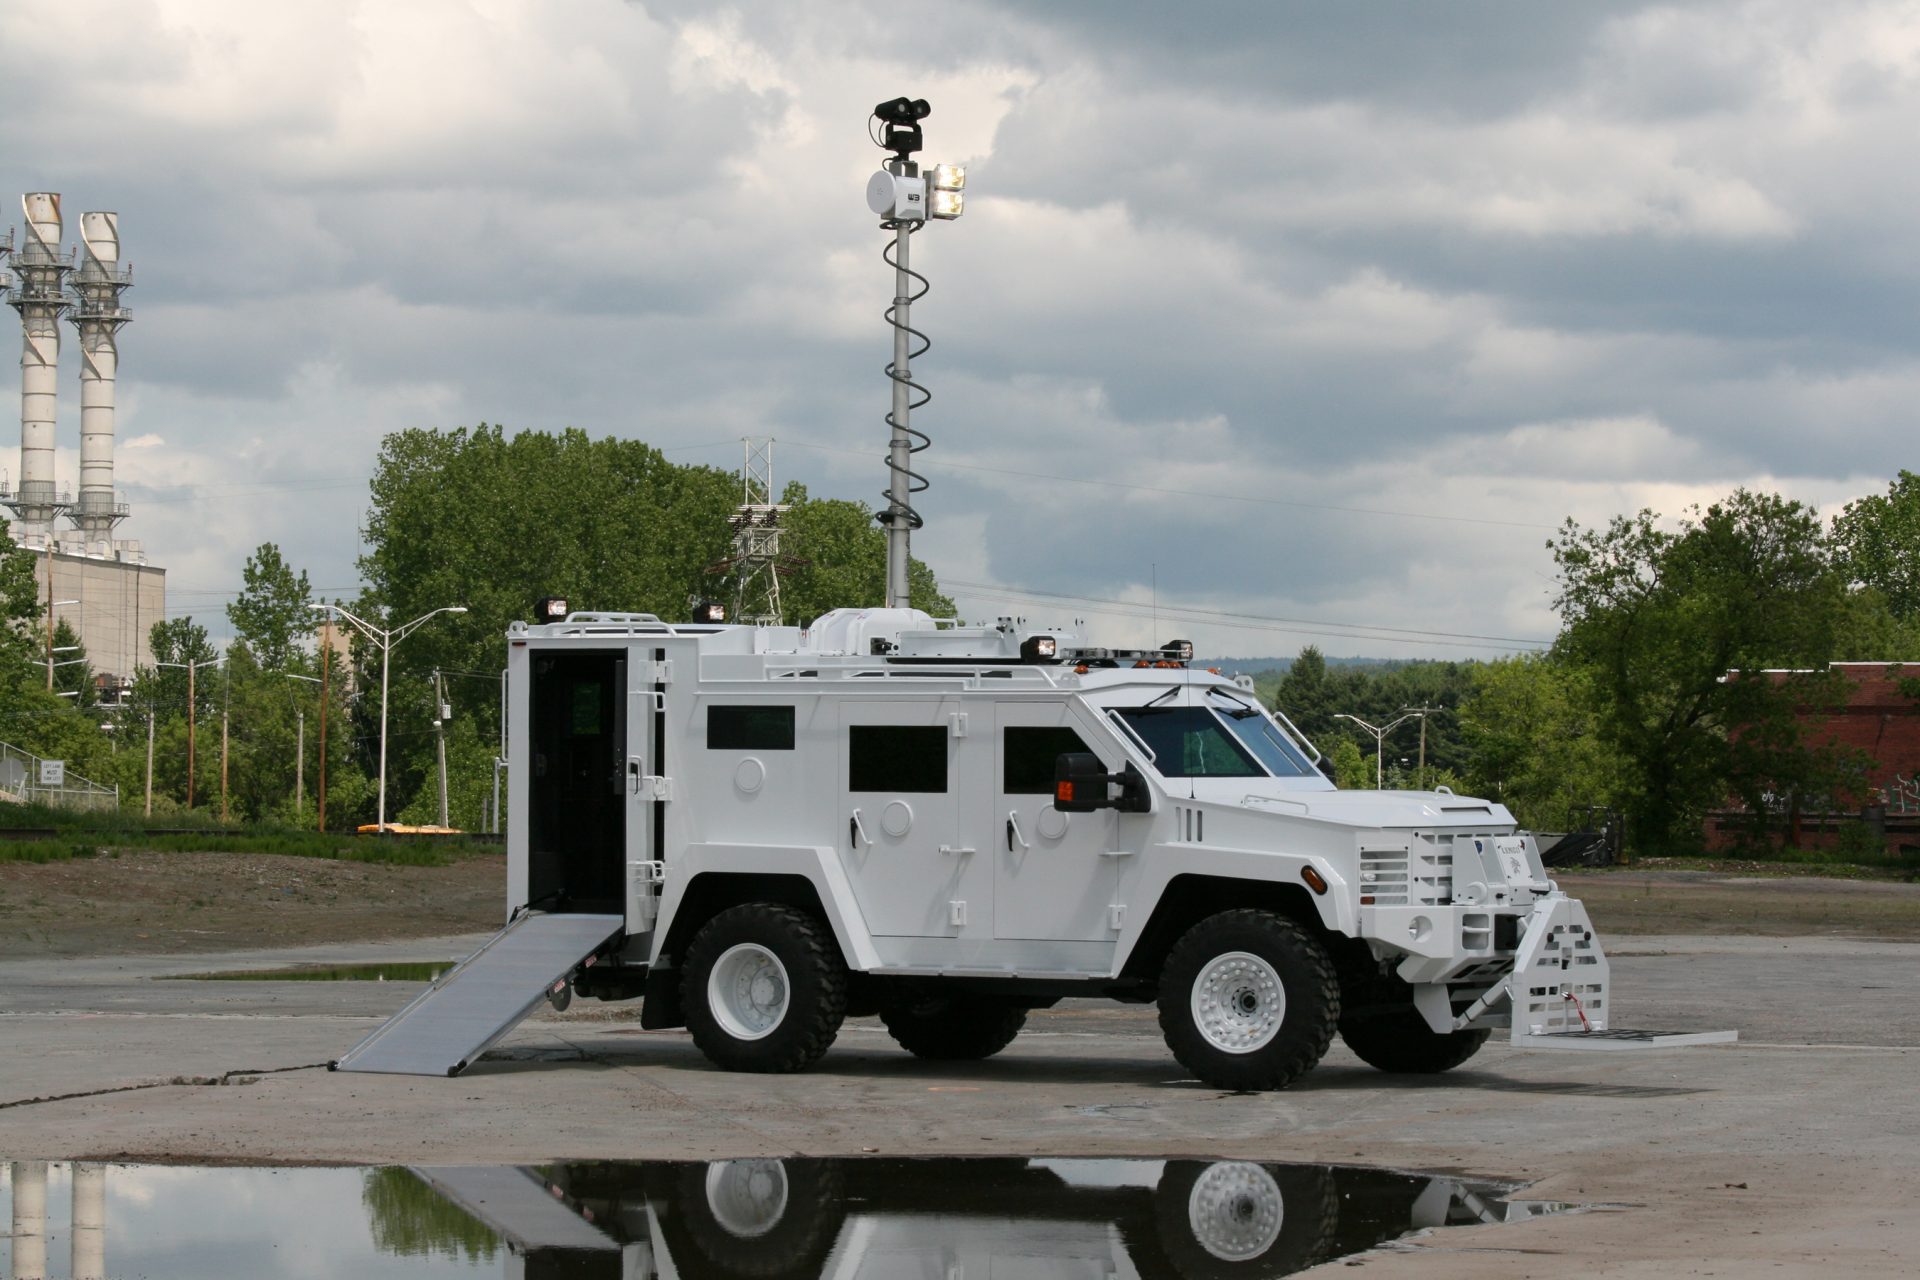 Two California Sheriff’s Departments tap Lenco Armored Vehicles for explosive ordnance disposal (EOD) vehicles